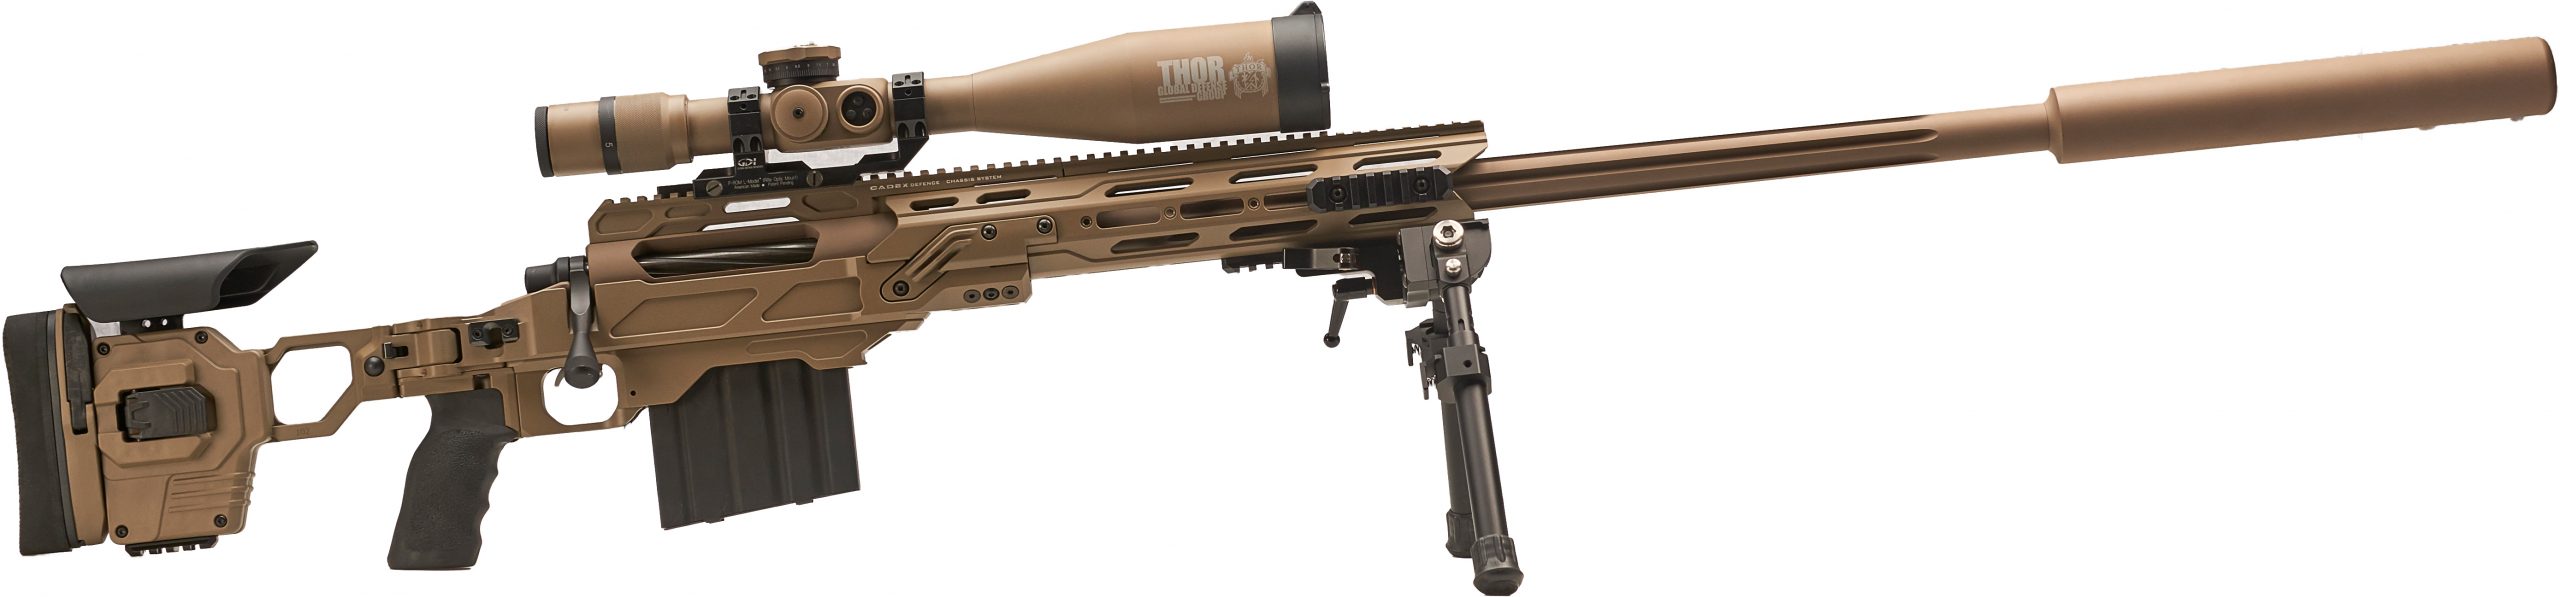 THOR TR408 Rifle .408CT Cadex Chassis